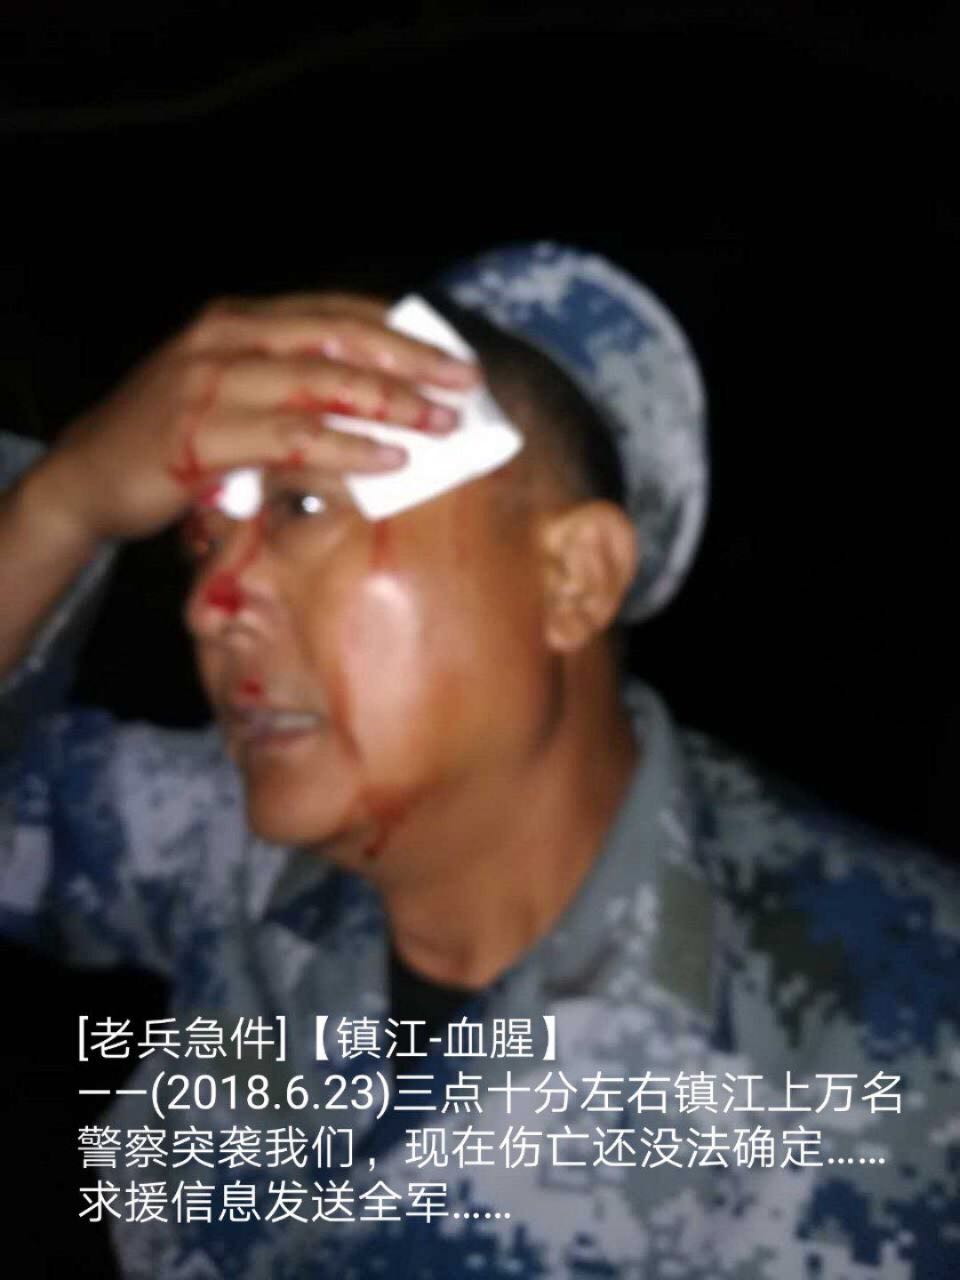 Authorities use violence in Zhenjiang, Veterans' urgent dispatch appeals for nationwide support 20180623